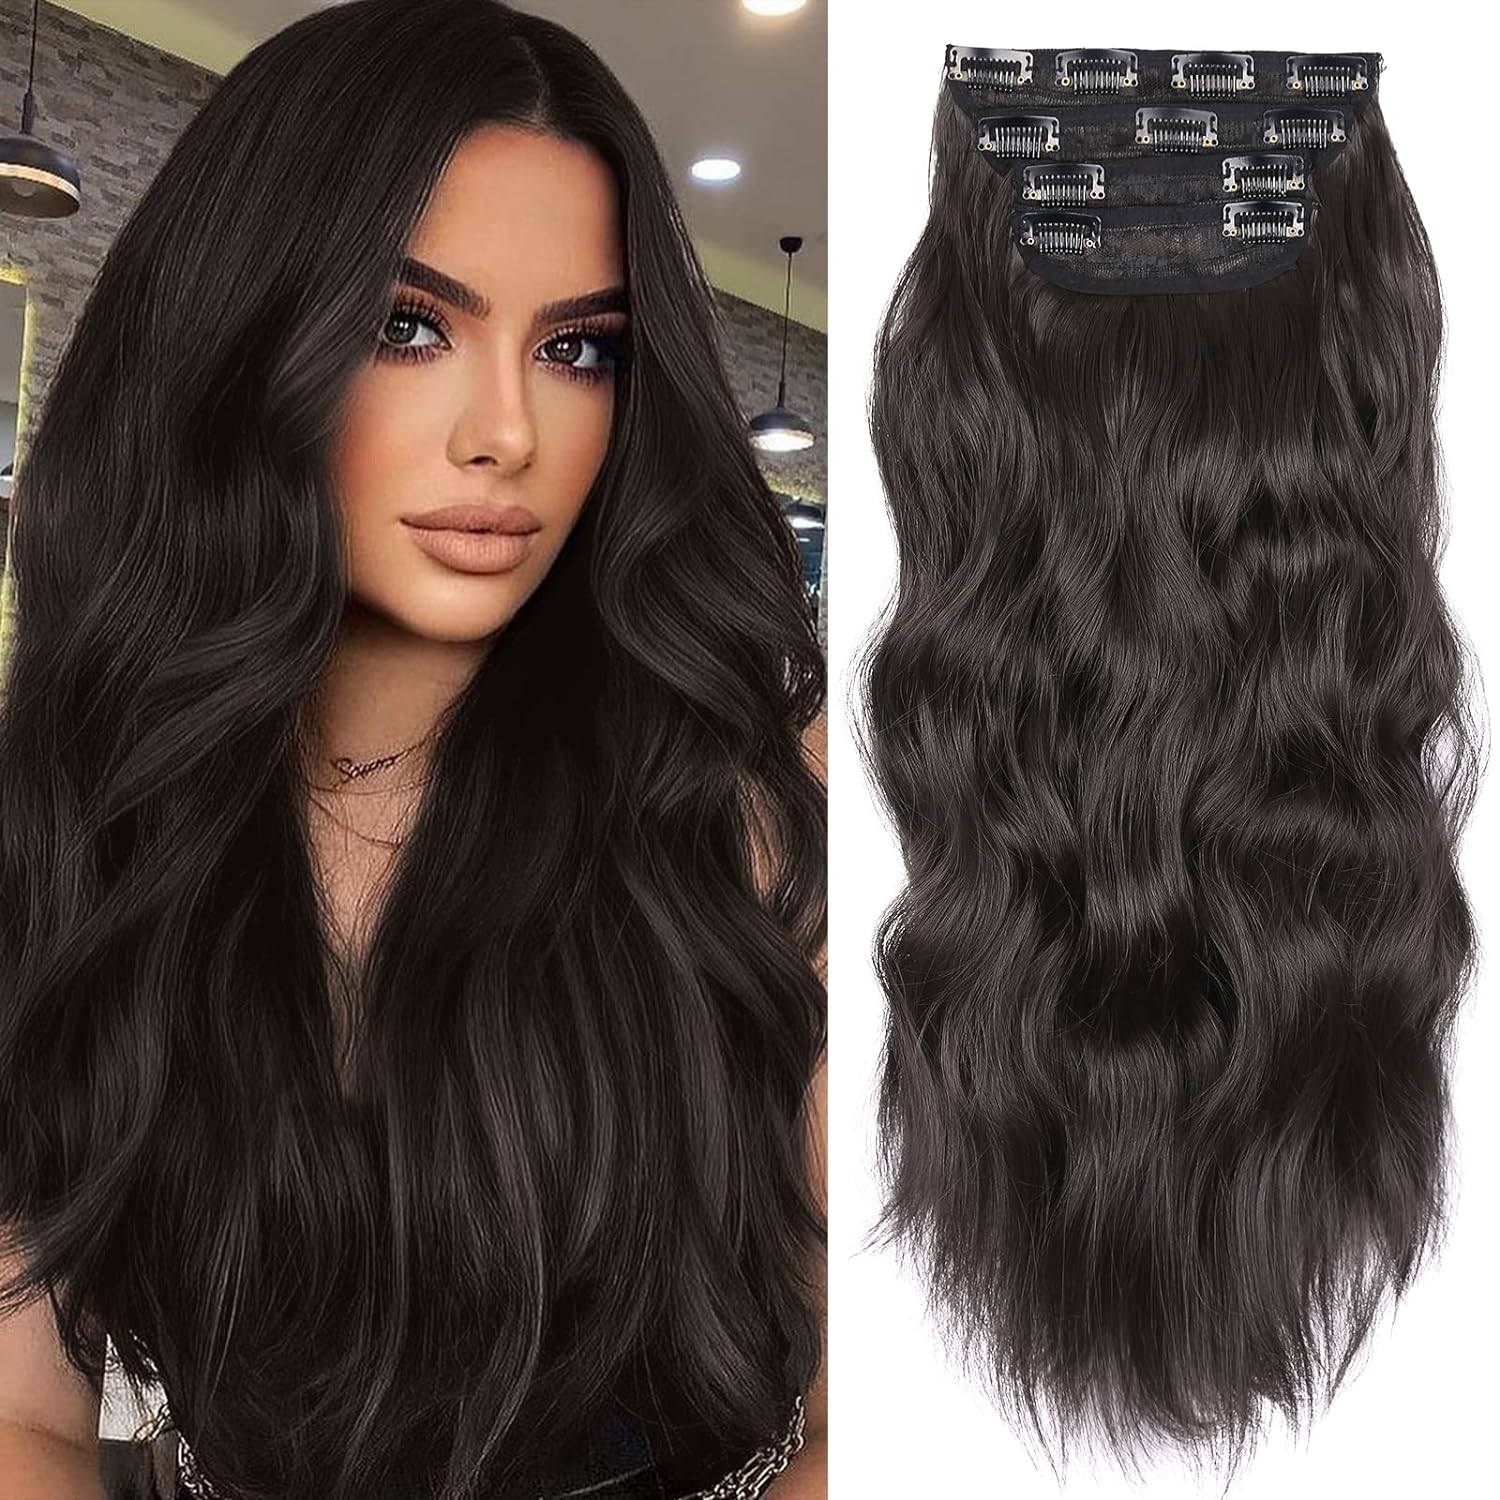 Vinisay Clip in Synthetic Hair Extensions Long Wavy Thick Hairpieces Black Brown Fiber Double Weft Natural Hair Extensions 20 Inch for Women